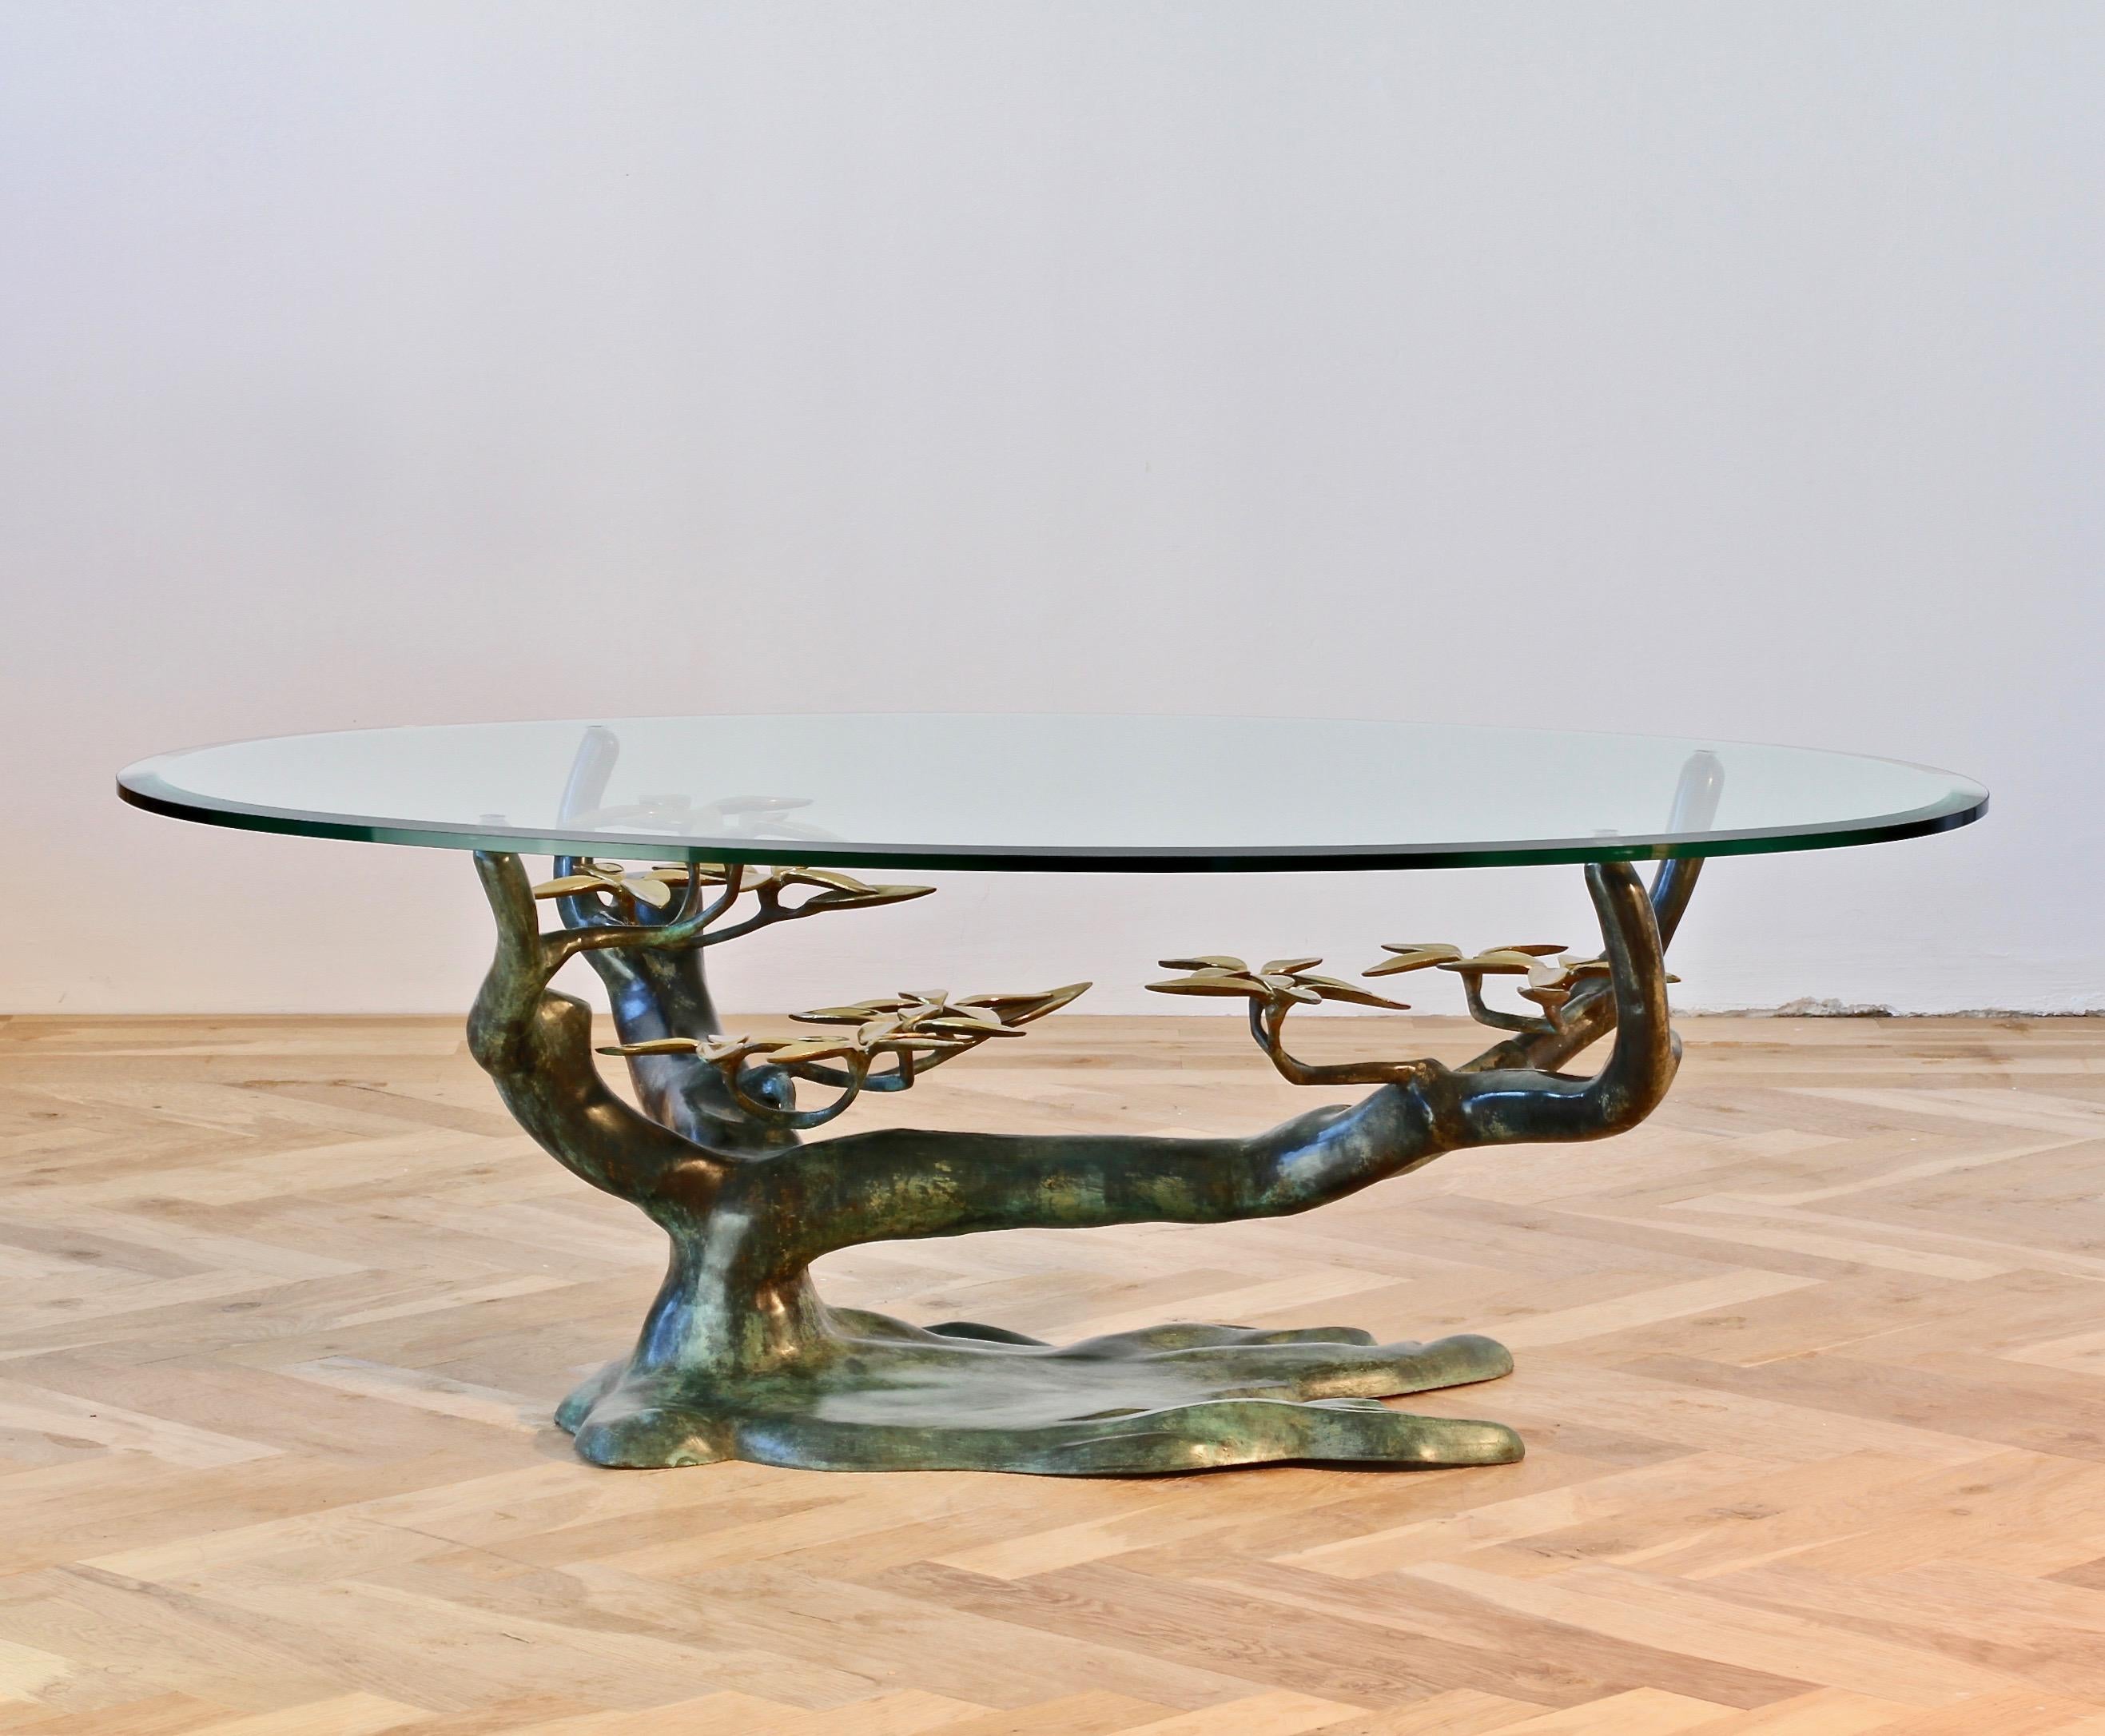 Whimsical vintage Willy Daro inspired coffee / cocktail table, cast in brass, takes on the organic form of a 'Bonsai' tree with the very stylized flower petals, while the patinated green branches hold a thick beveled edged clear glass table top. The